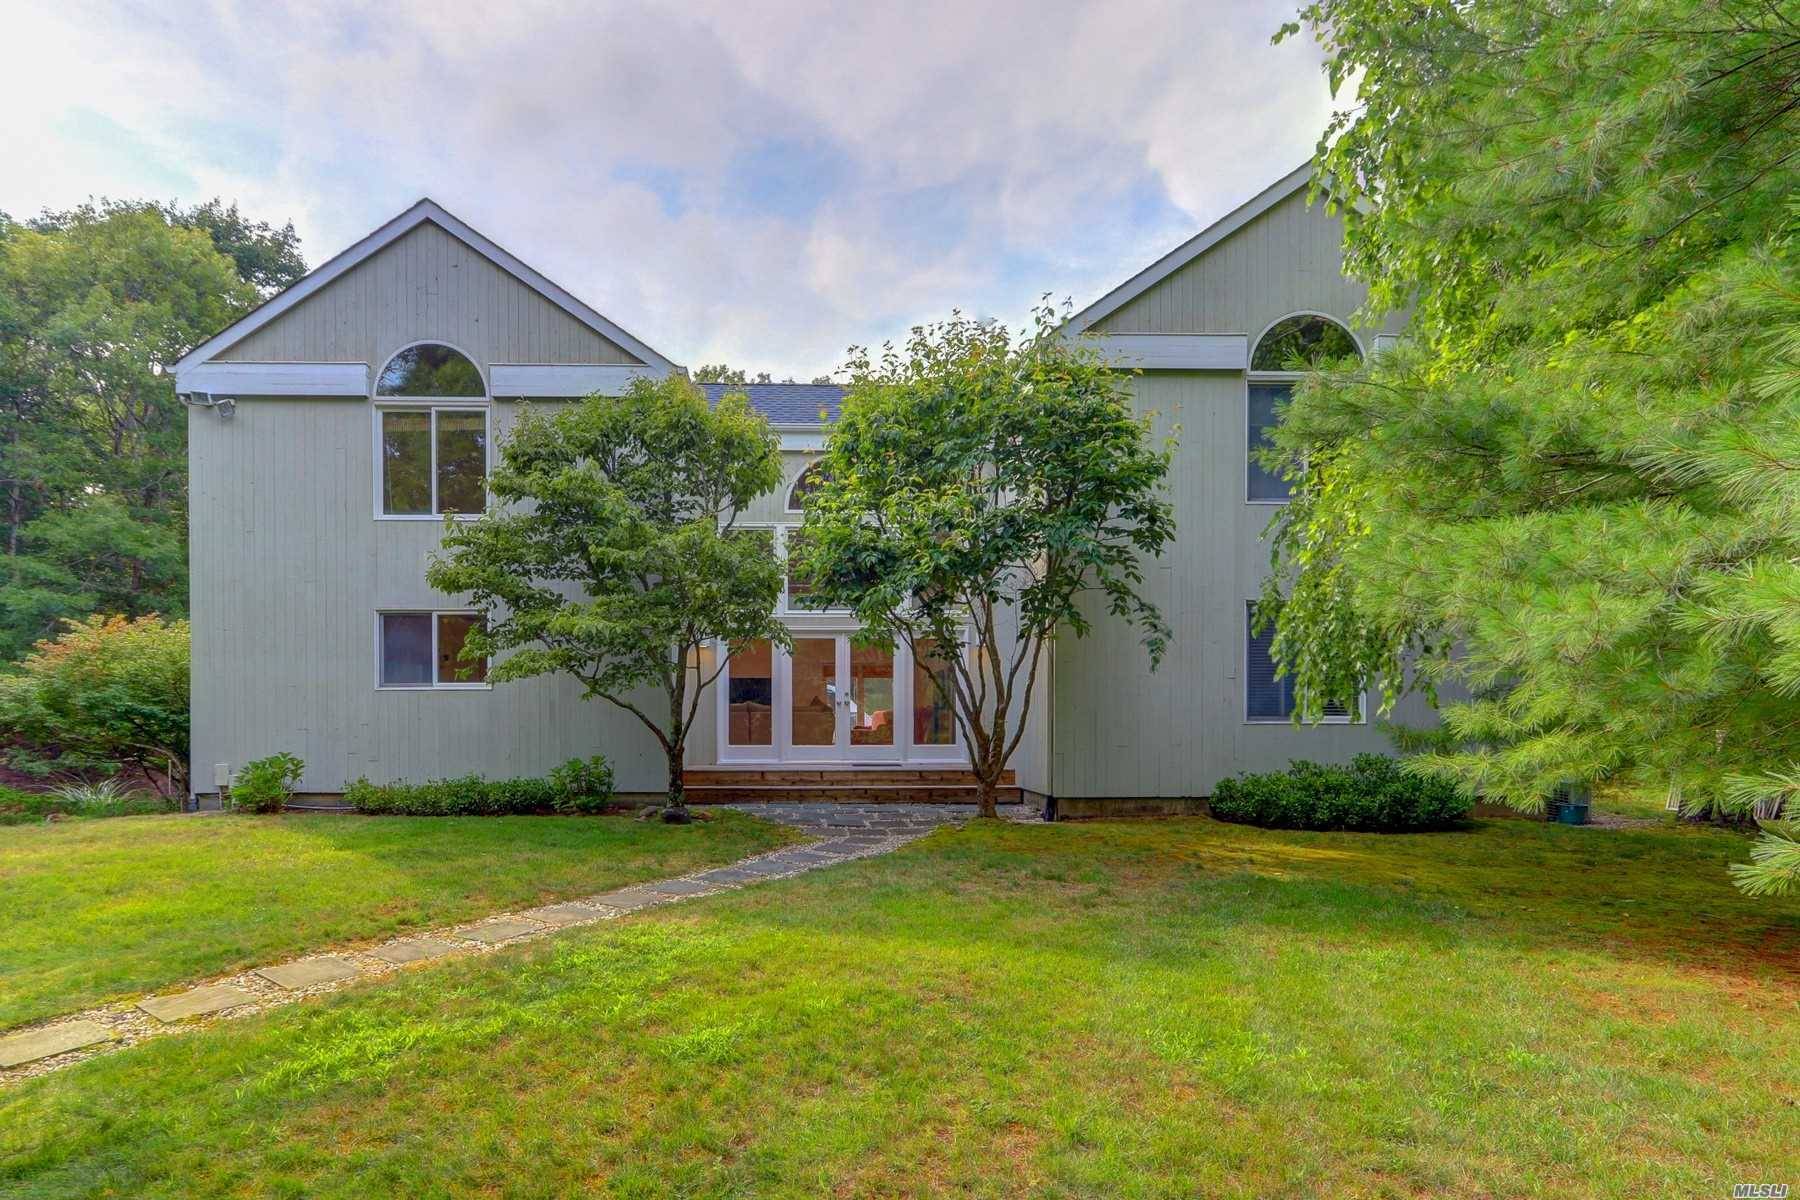 Well Placed On Just Shy One Acre Of Property In The Prestigious Nw Harbor Section Of East Hampton Sits This Post Modern Four Bedroom And Three Bath Contemporary Beach House.